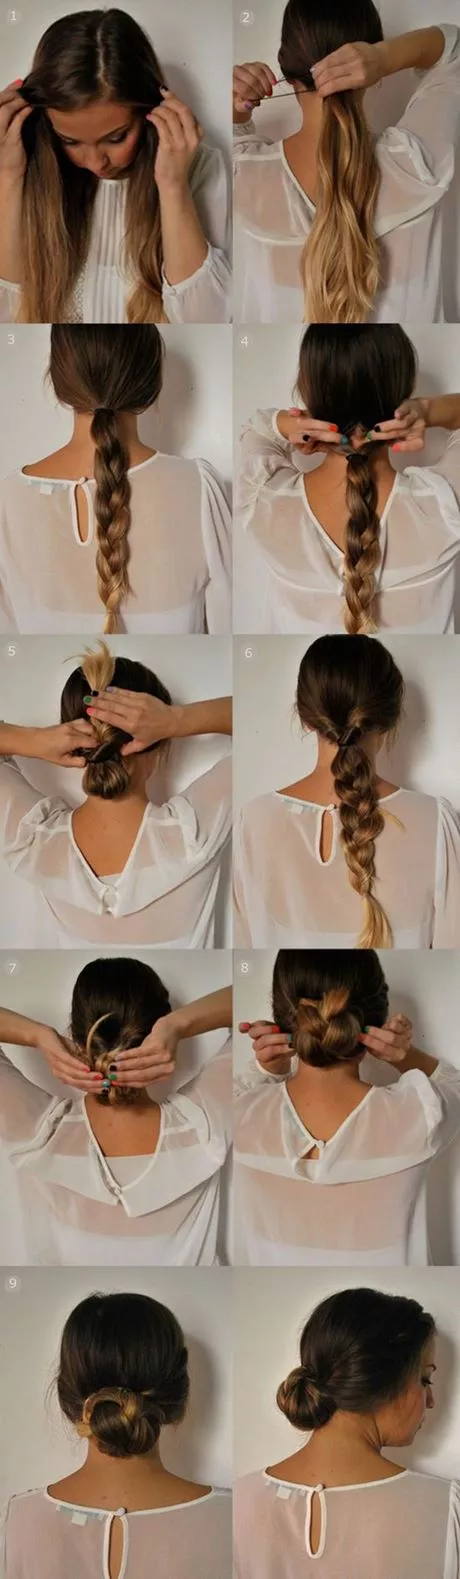 New simple hairstyle for girls new-simple-hairstyle-for-girls-65_13-6-6